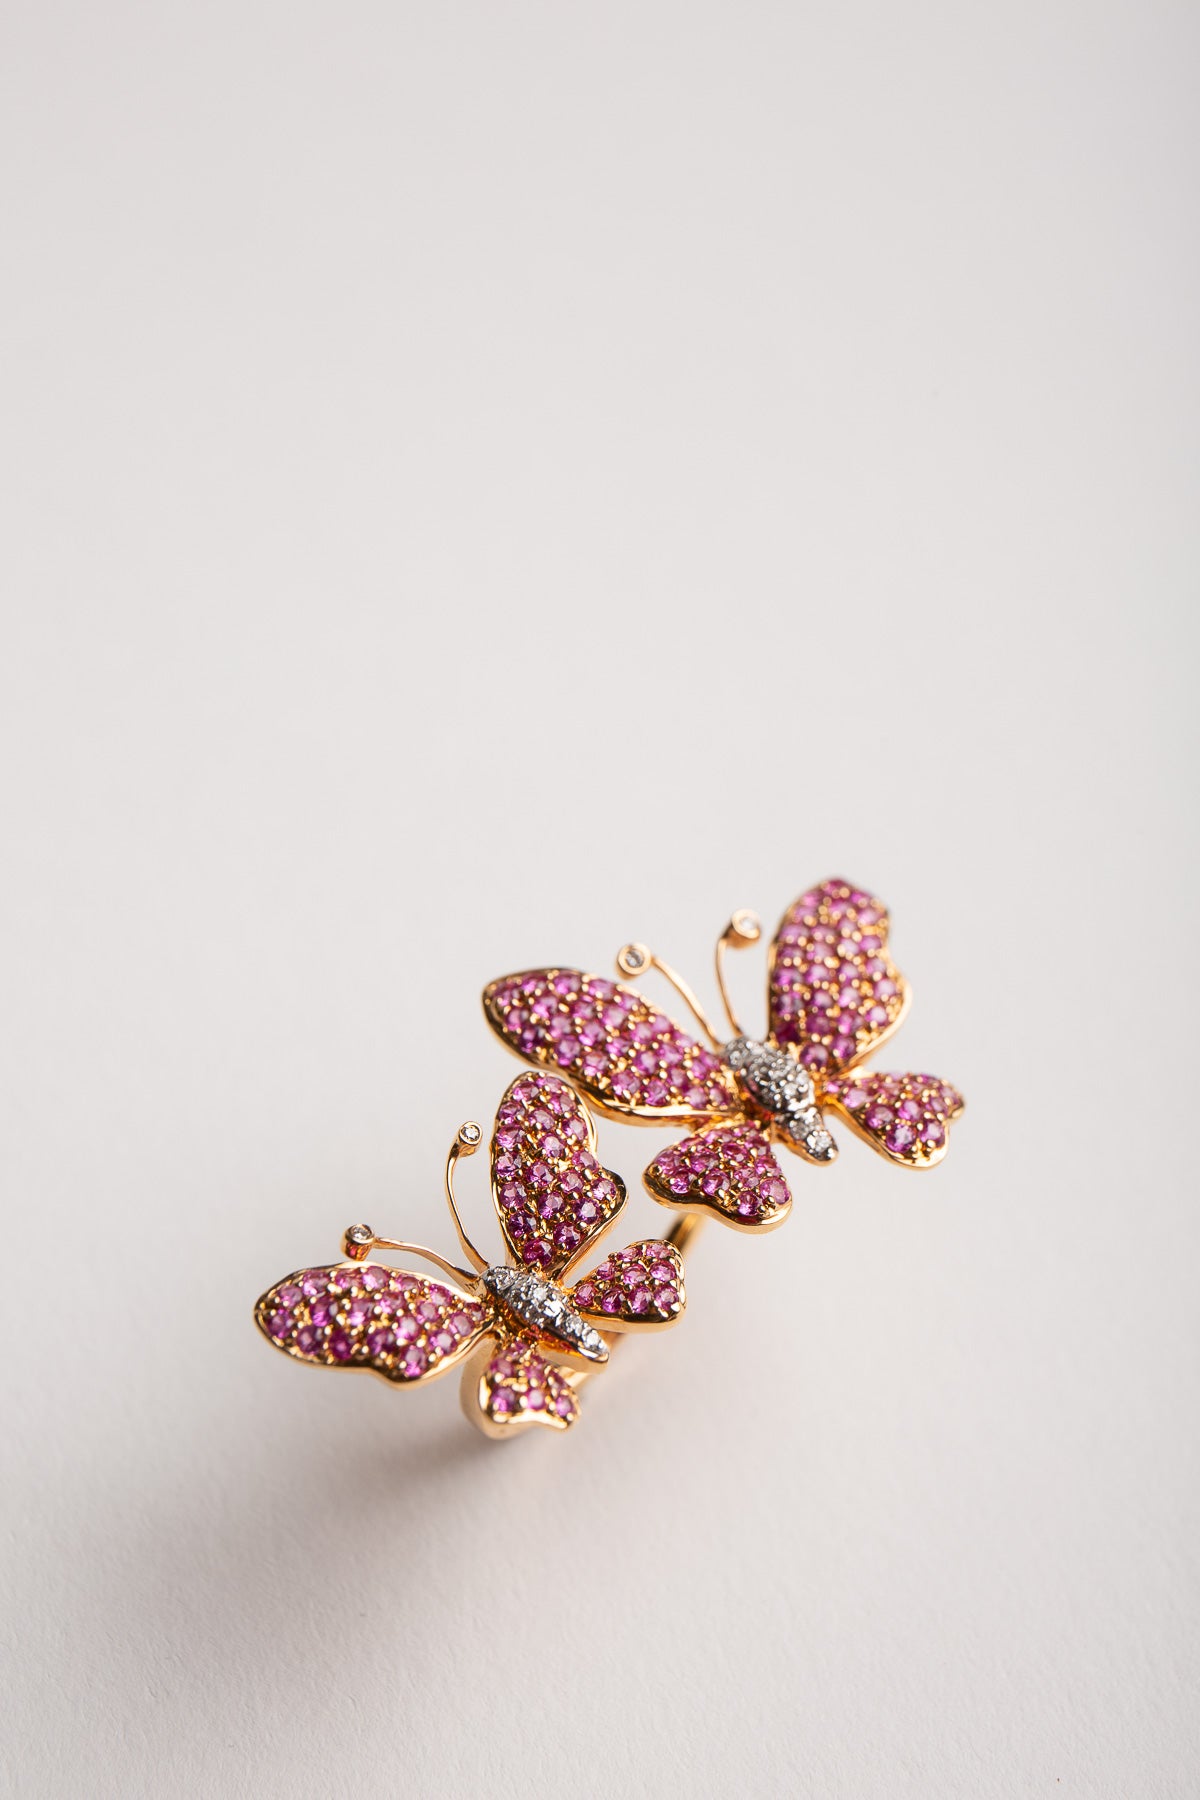 STEFERE | 18K ROSE GOLD PINK SAPPHIRE BUTTERFLY RING